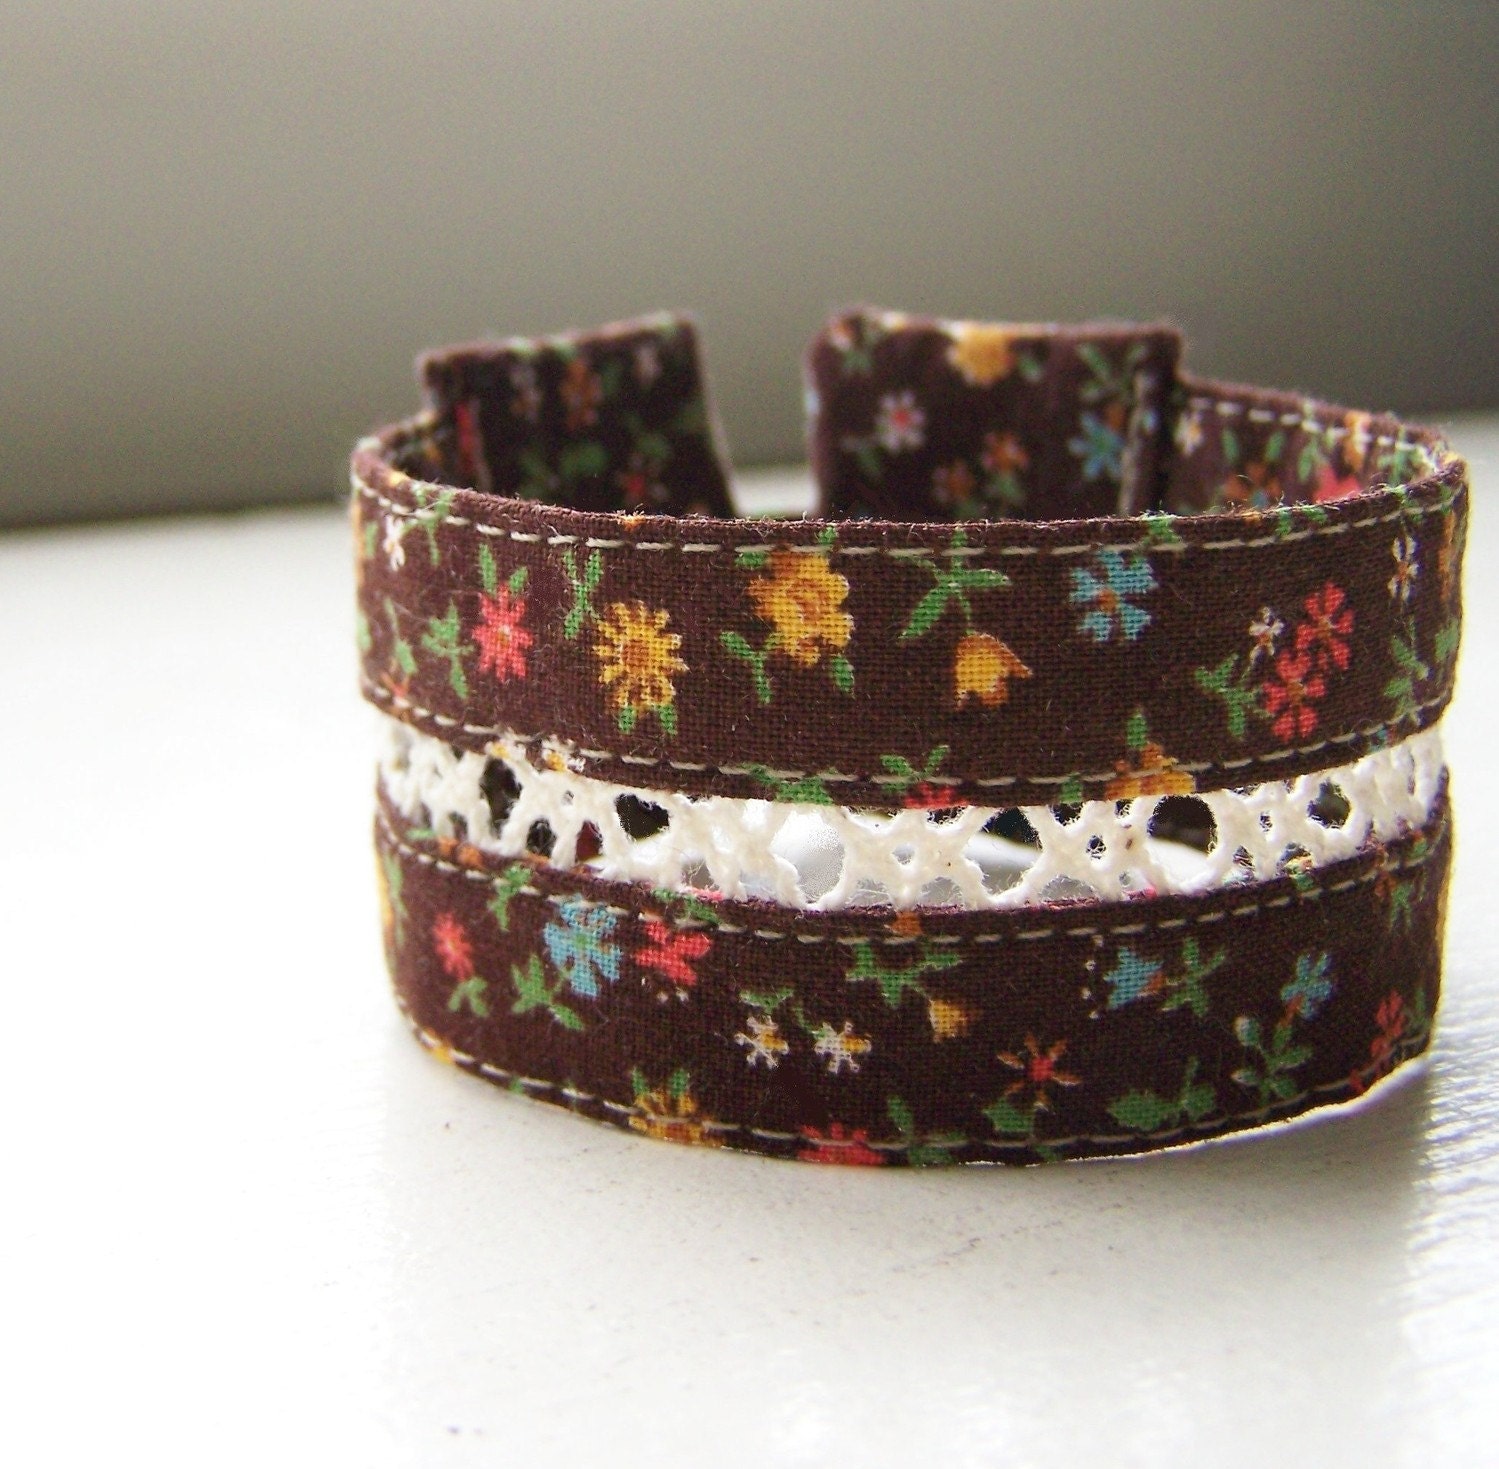 Double strand cuff bracelet in vintage calico and crocheted lace READY TO SHIP